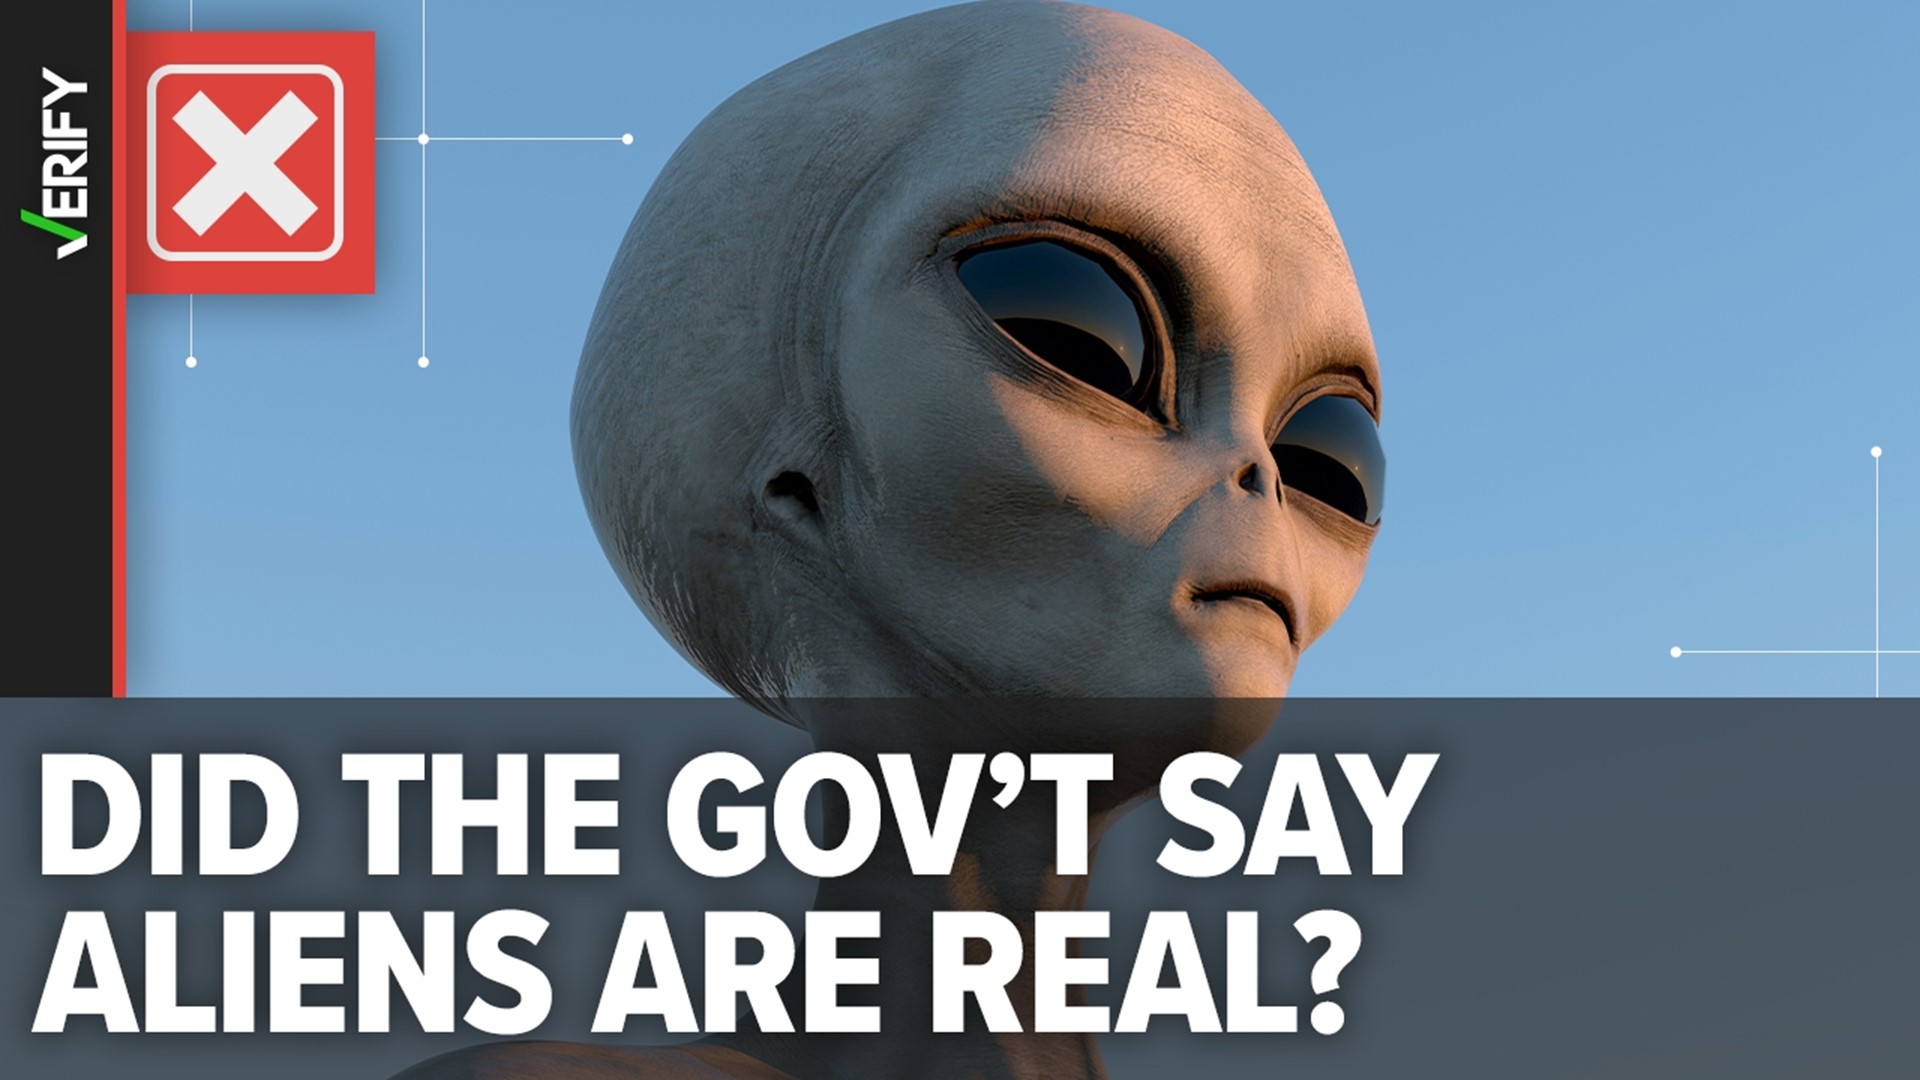 The U.S. government didn’t say that aliens are real.